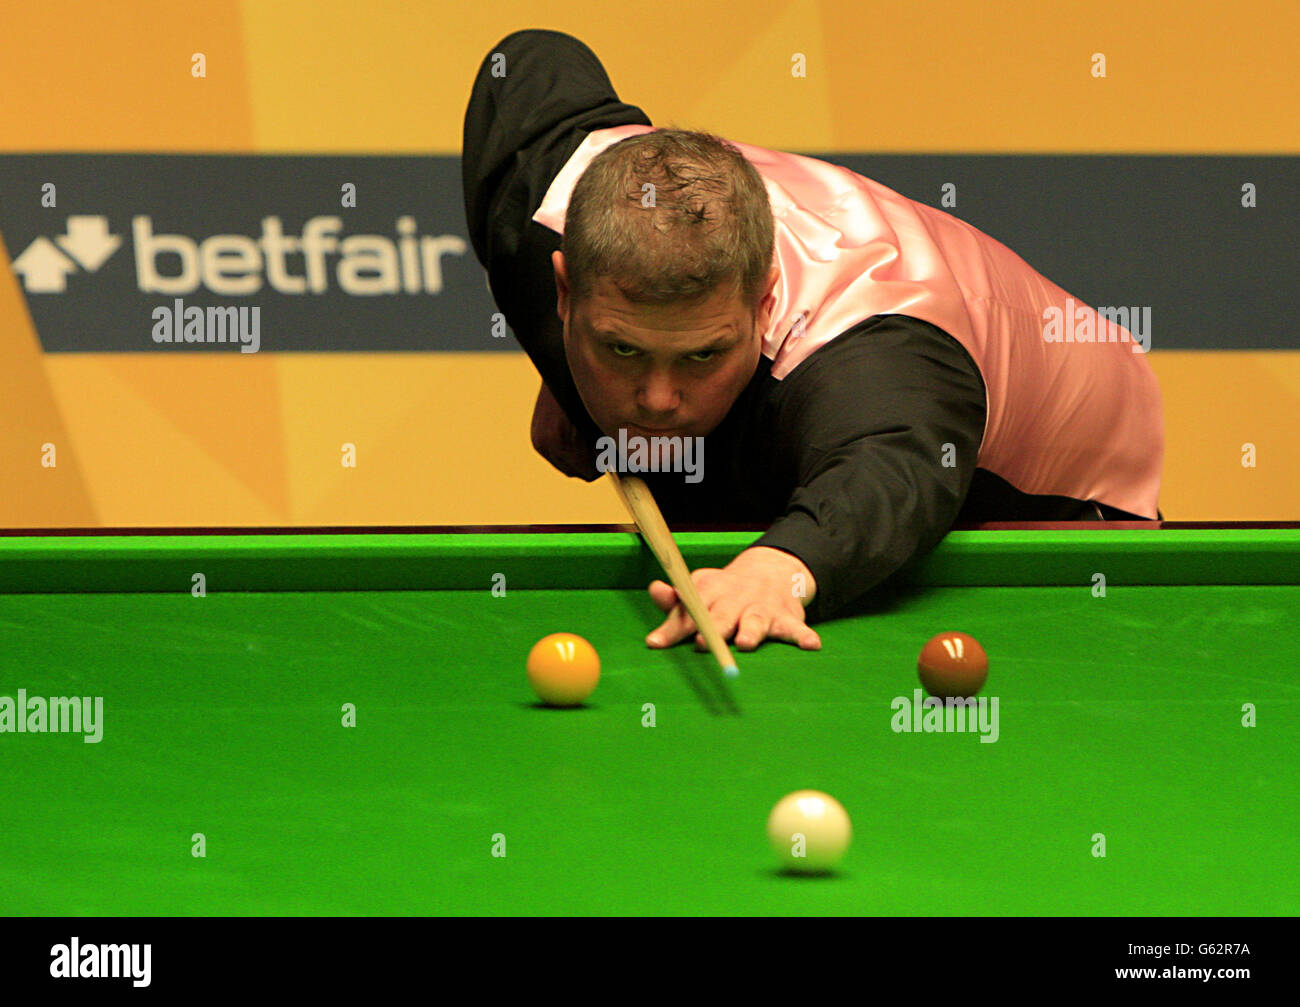 Robert Milkins during his first round match against Neil Robertson during the Betfair World Championships at the Crucible, Sheffield. Stock Photo